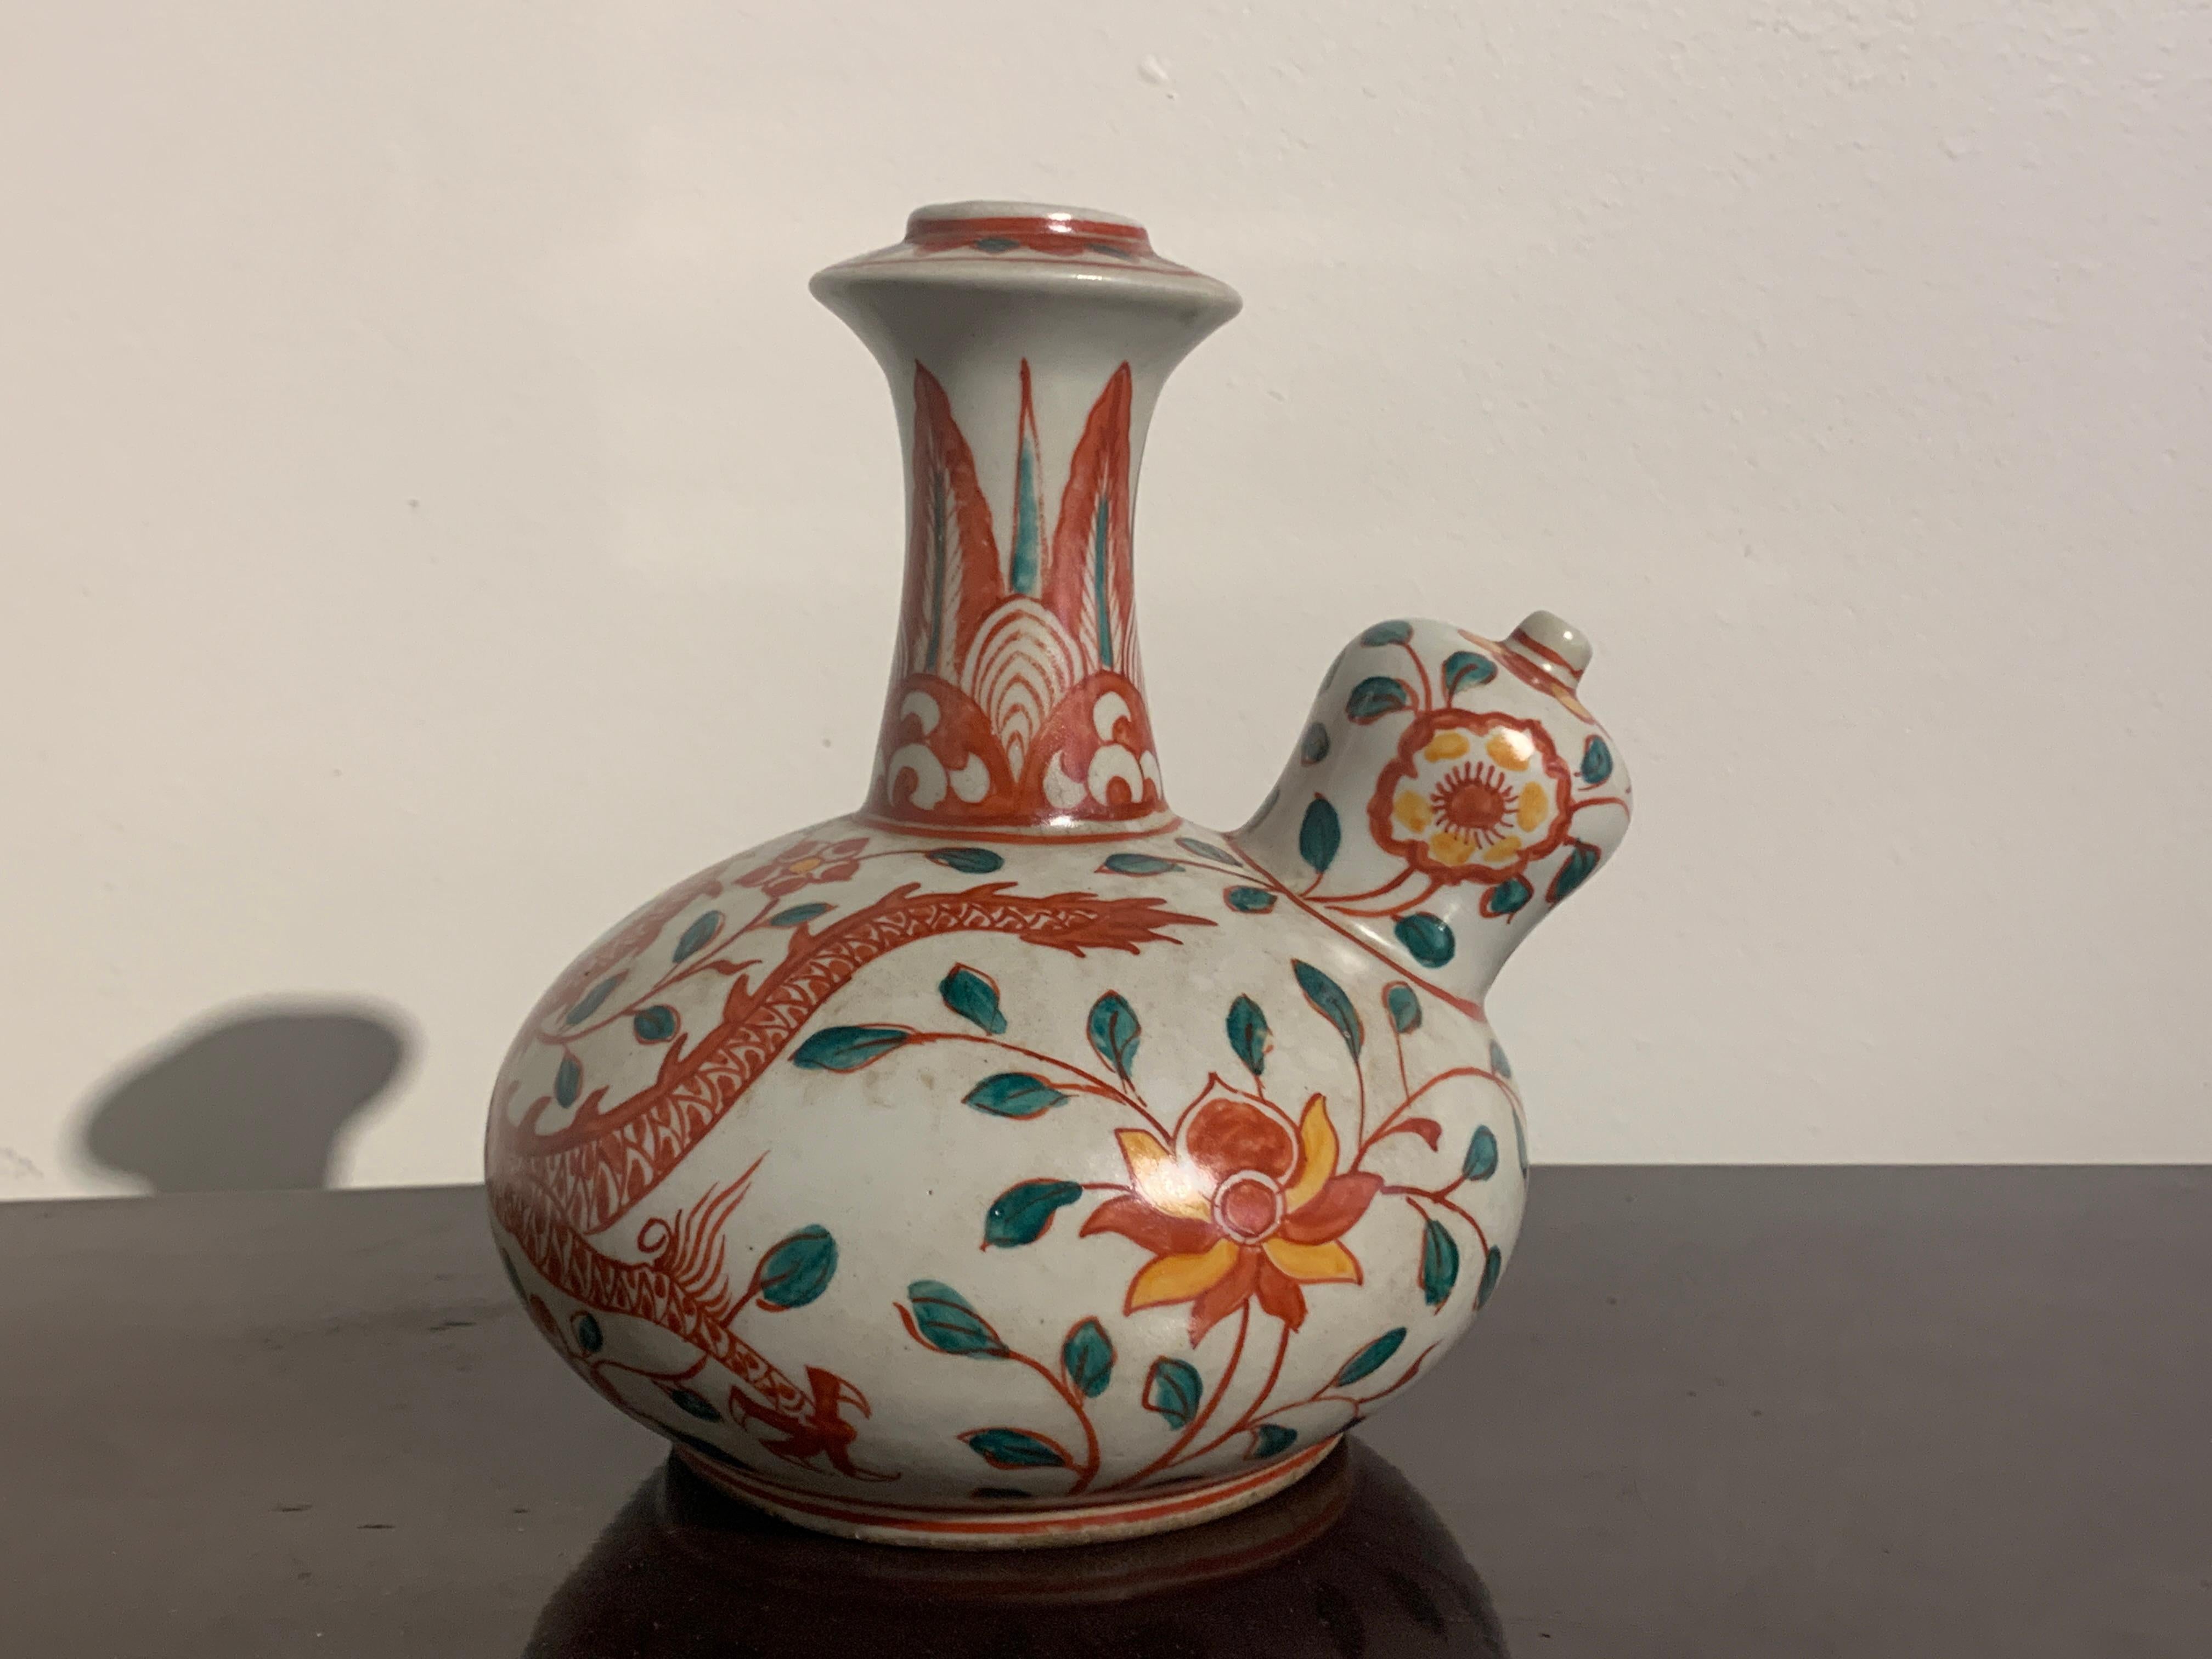 Qing Chinese Export Kendi, Swatow Ware, Porcelain with Polychrome Enamels, circa 1900 For Sale